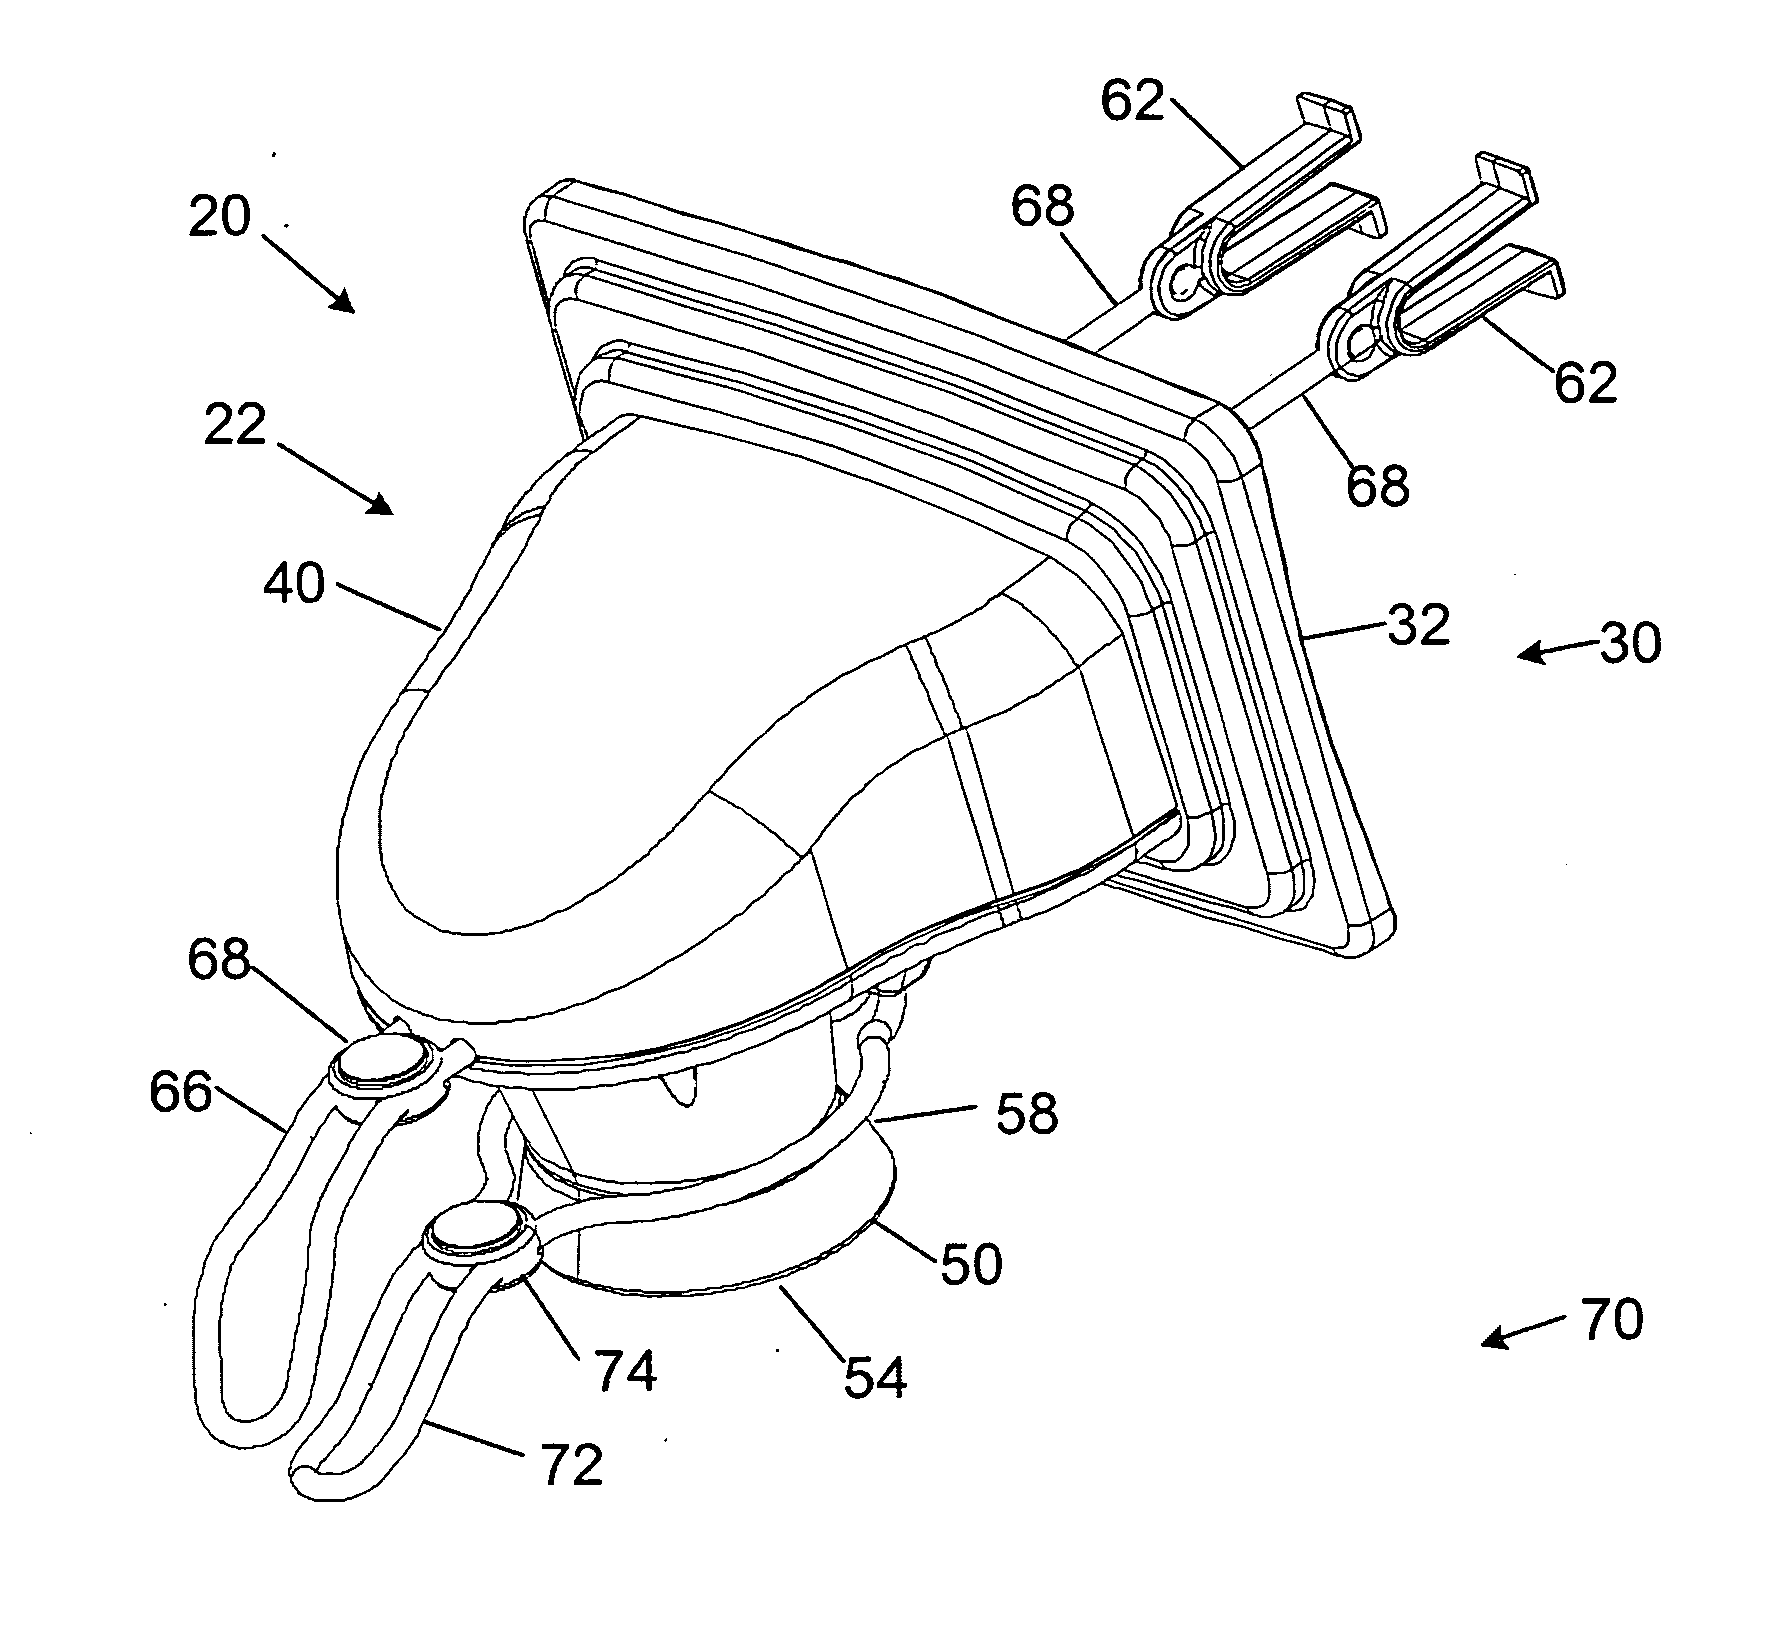 Device and method for redirecting airflow from a vent to an article